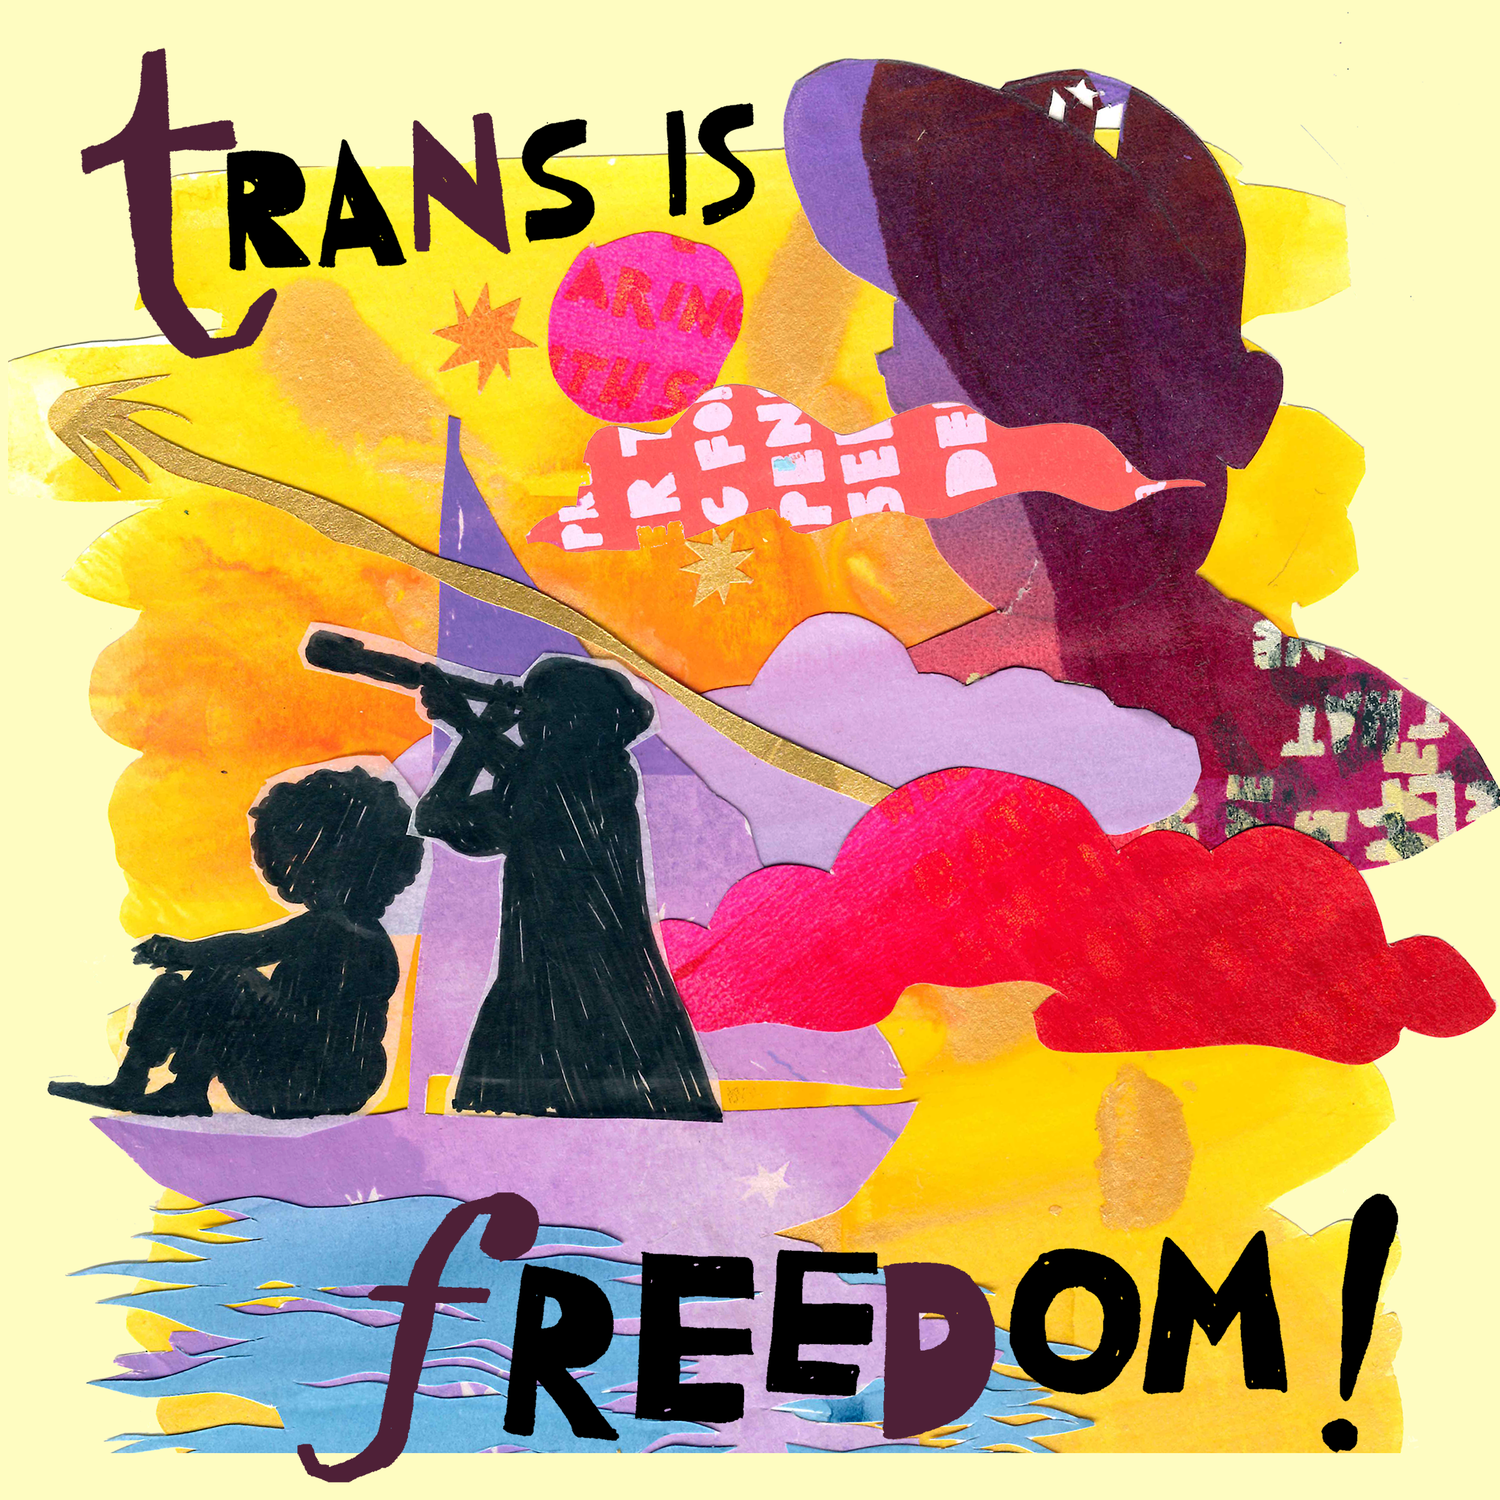 Illustration by Kah Yanghi, that reads "trans is freedom!"